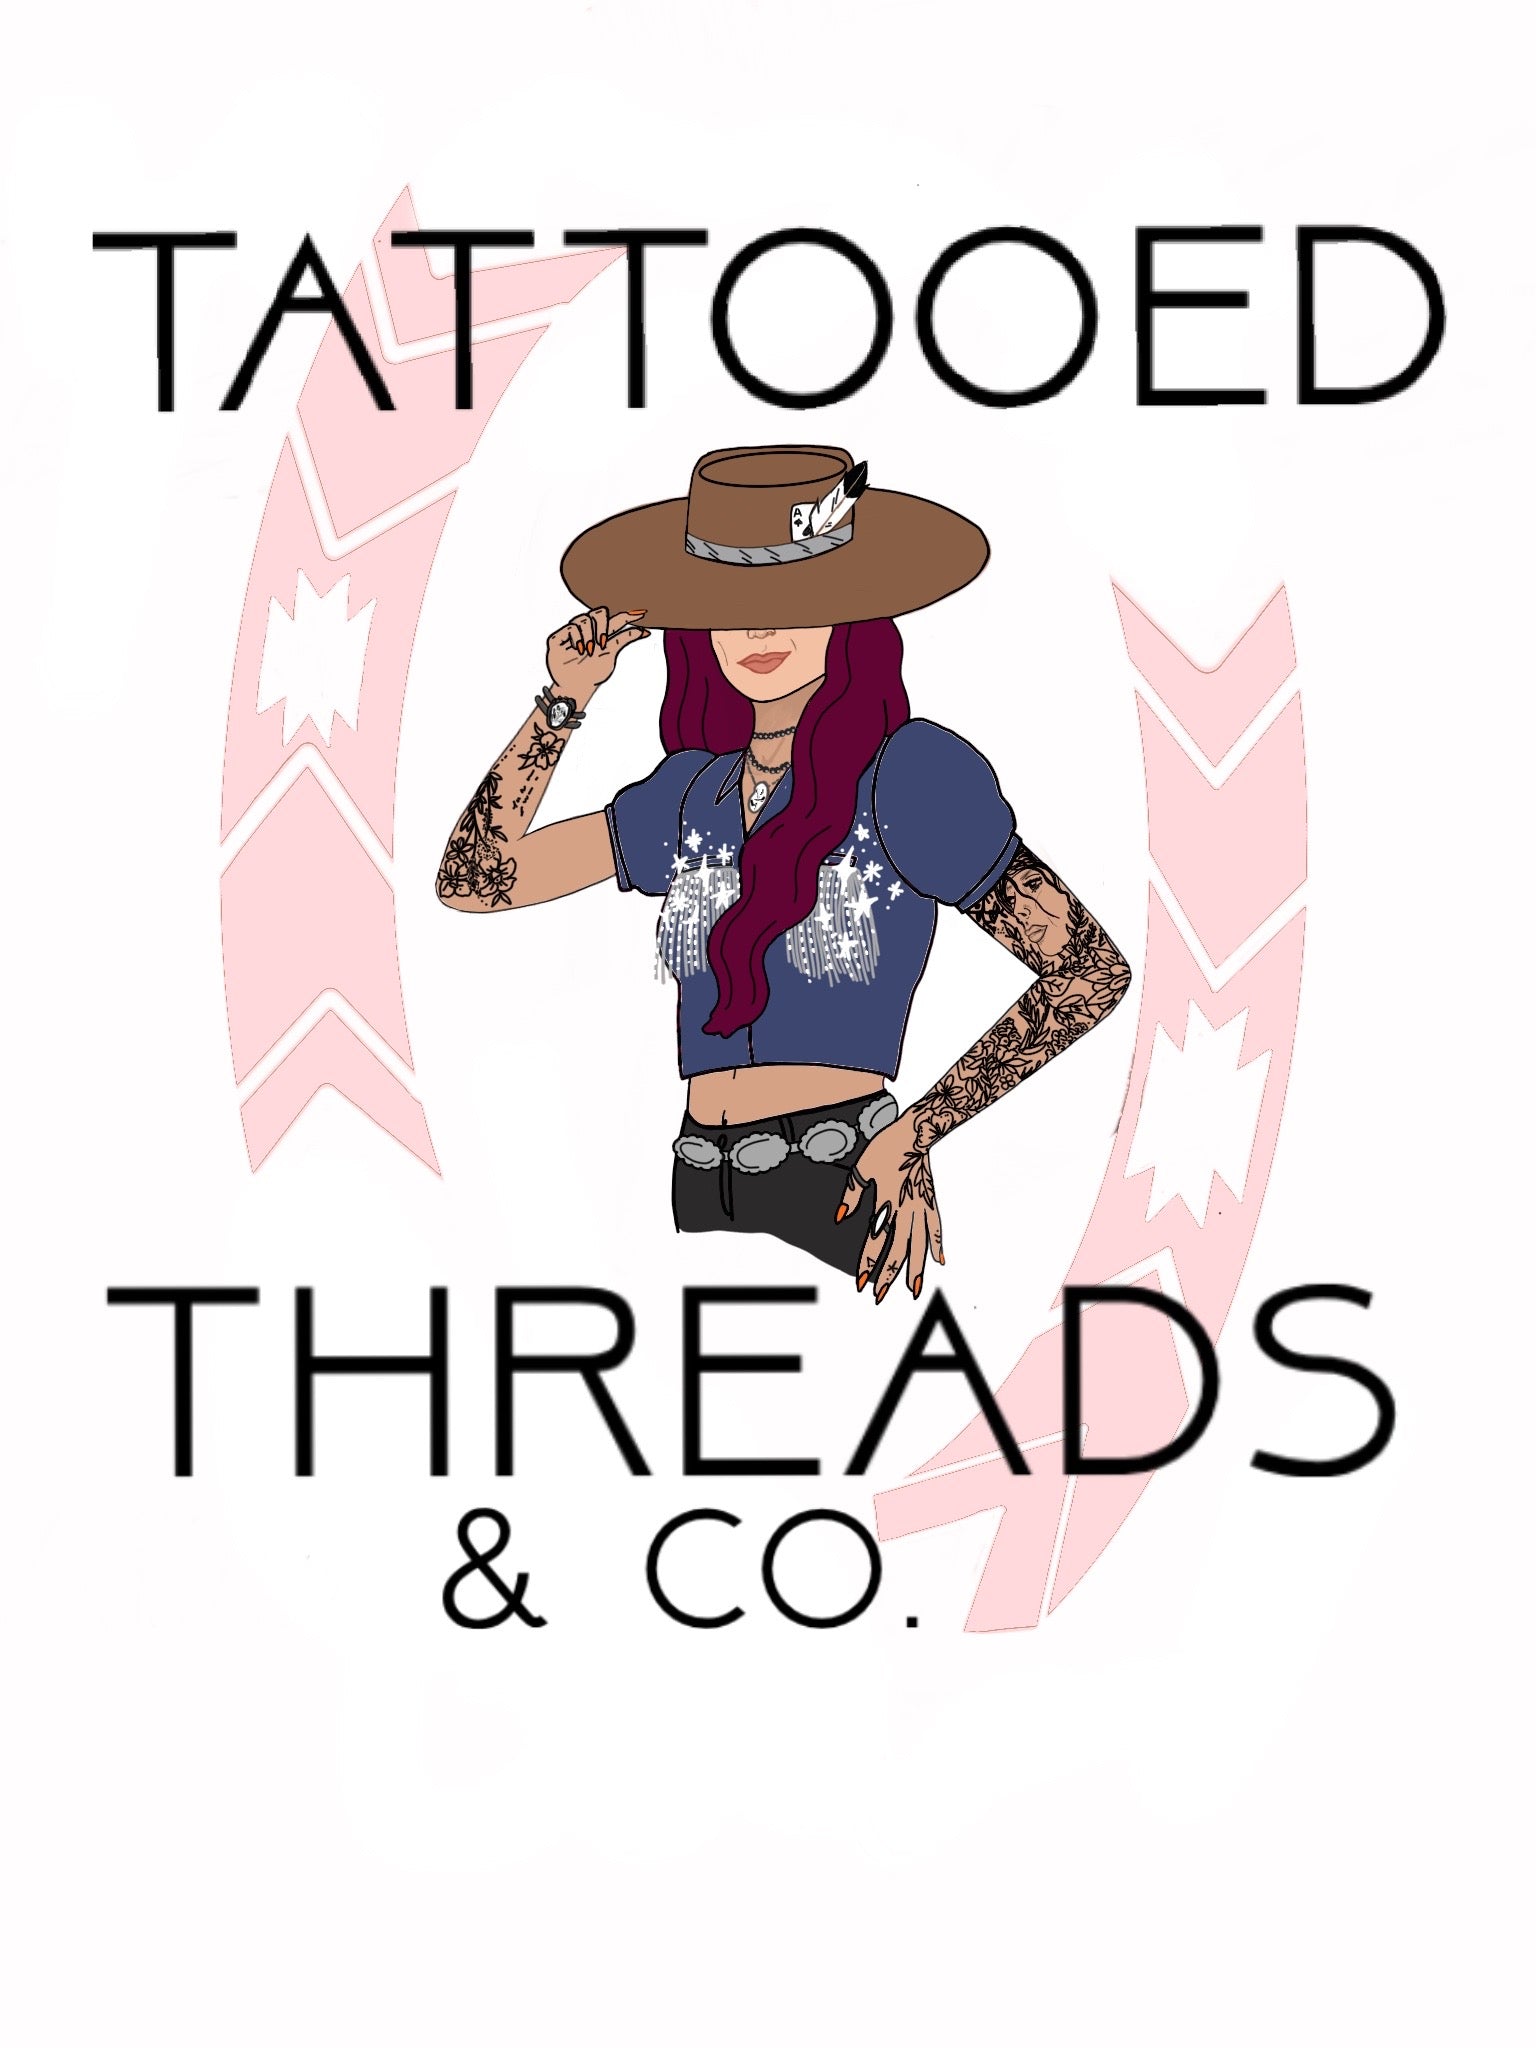 Tattooed Threads and Co.